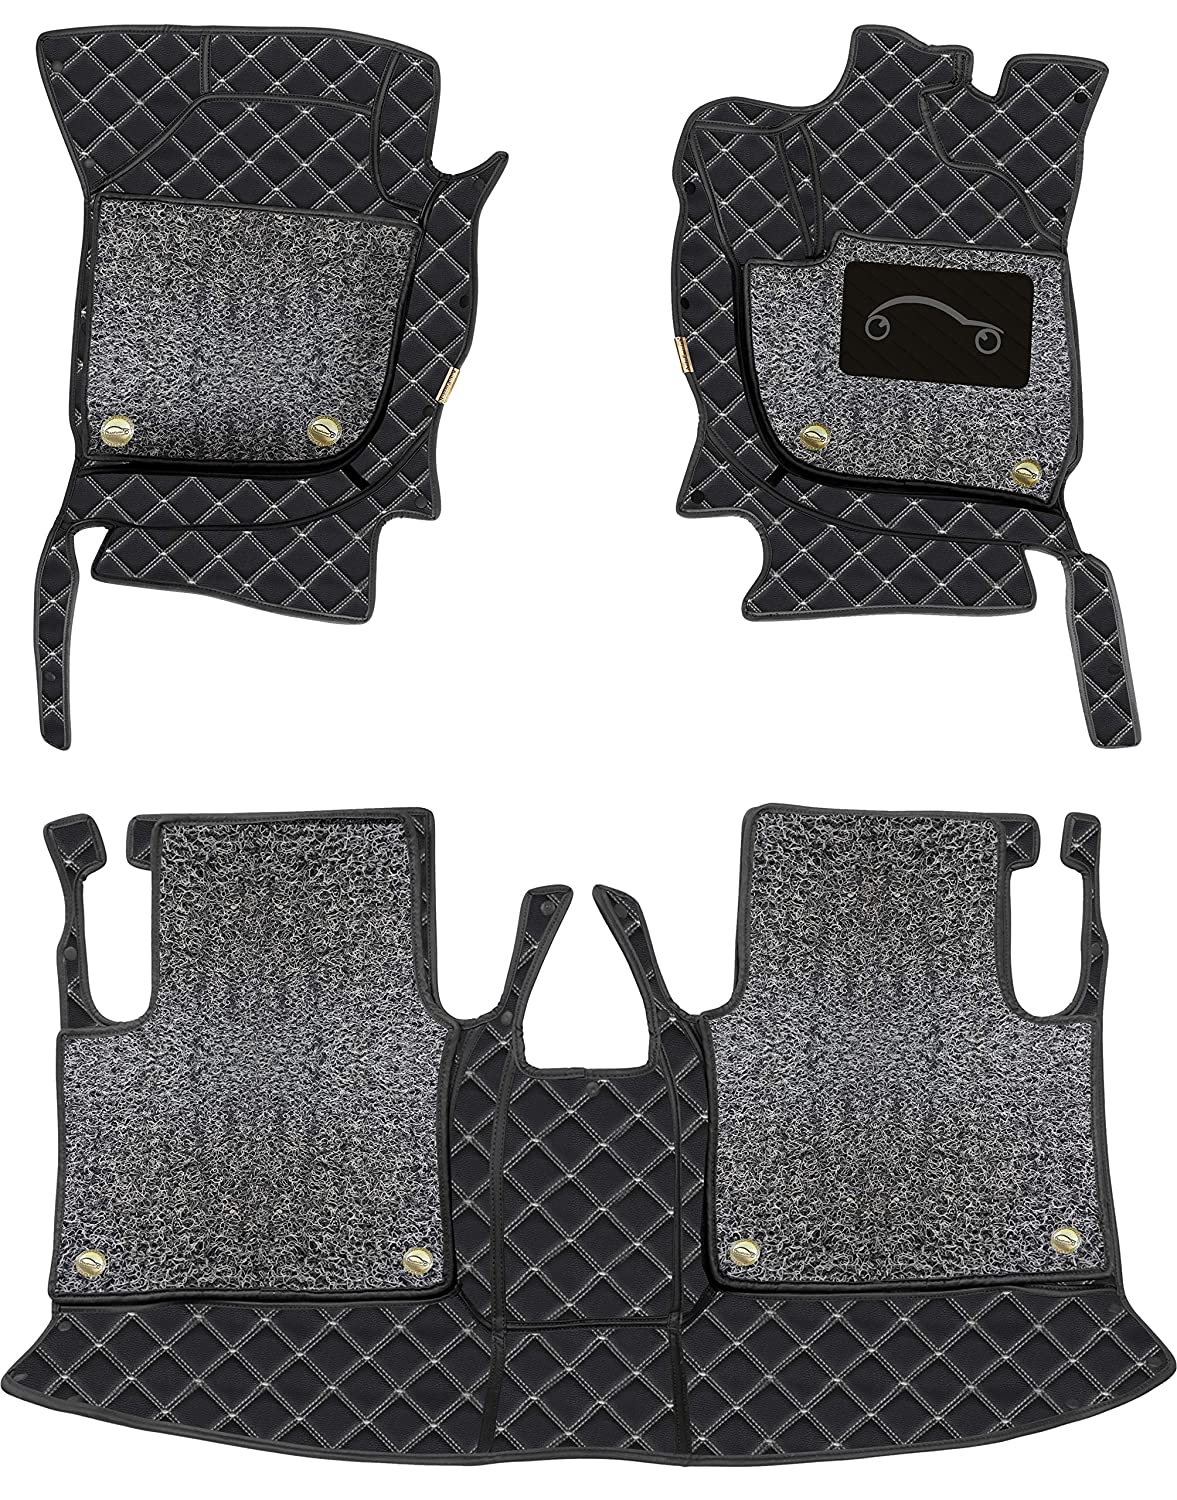 Mercedes GLA 200 2021 7D Luxury Car Mat, All Weather Proof, Anti-Skid, 100% Waterproof & Odorless with Unique Diamond Fish Design (24mm Luxury PU Leather, 2 Rows)